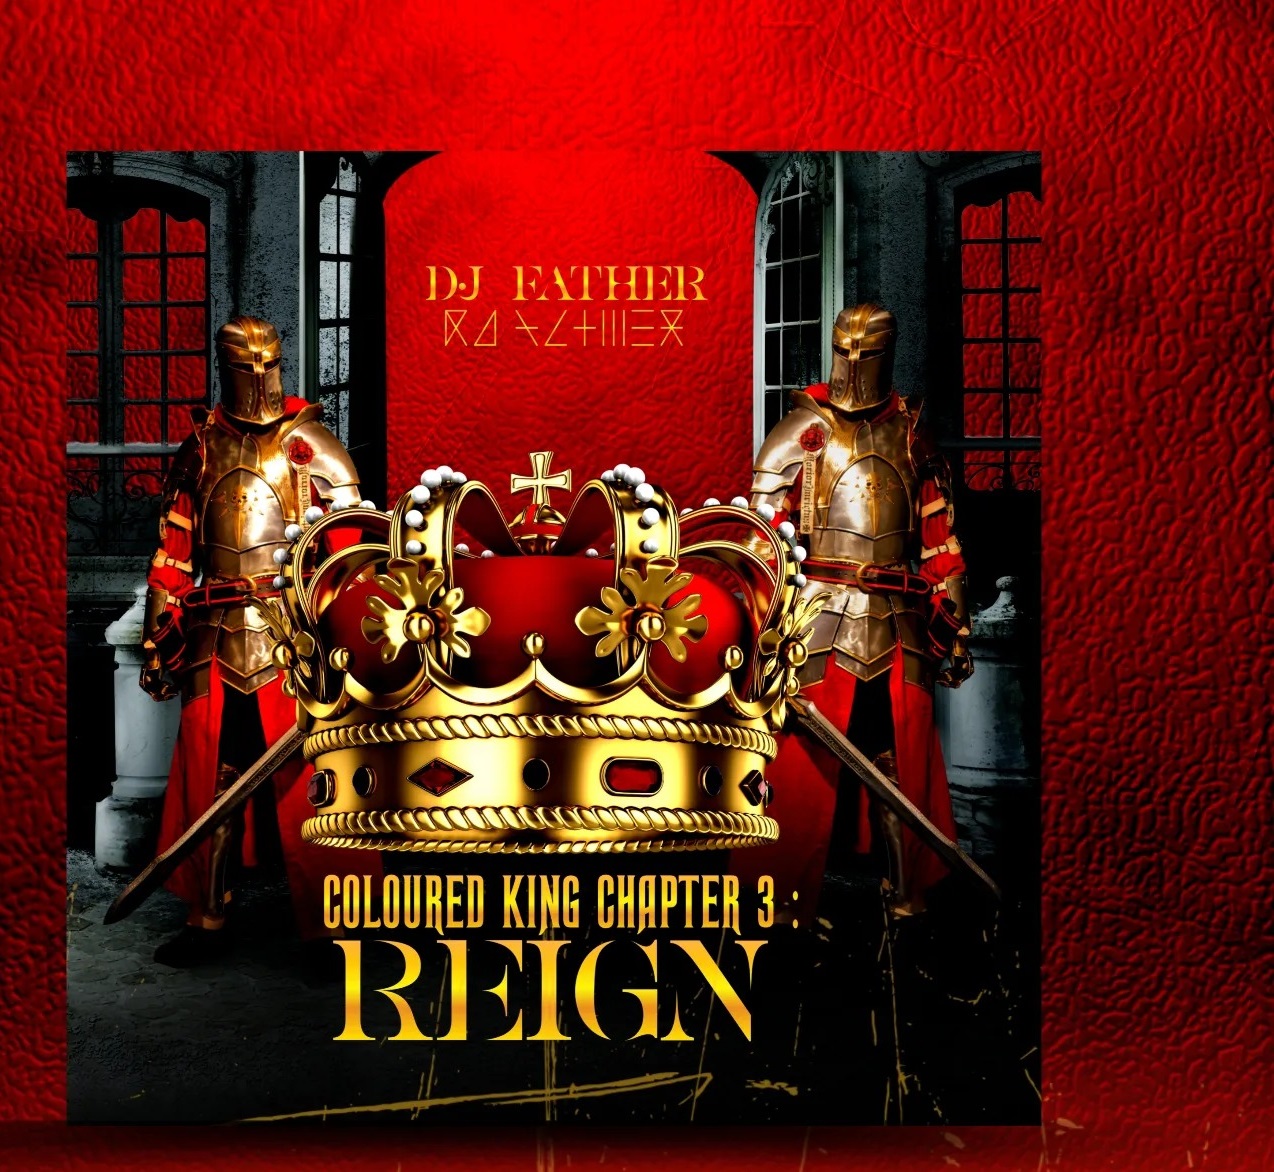 Coloured King Chapter 3 Reign by Dj Father | Album